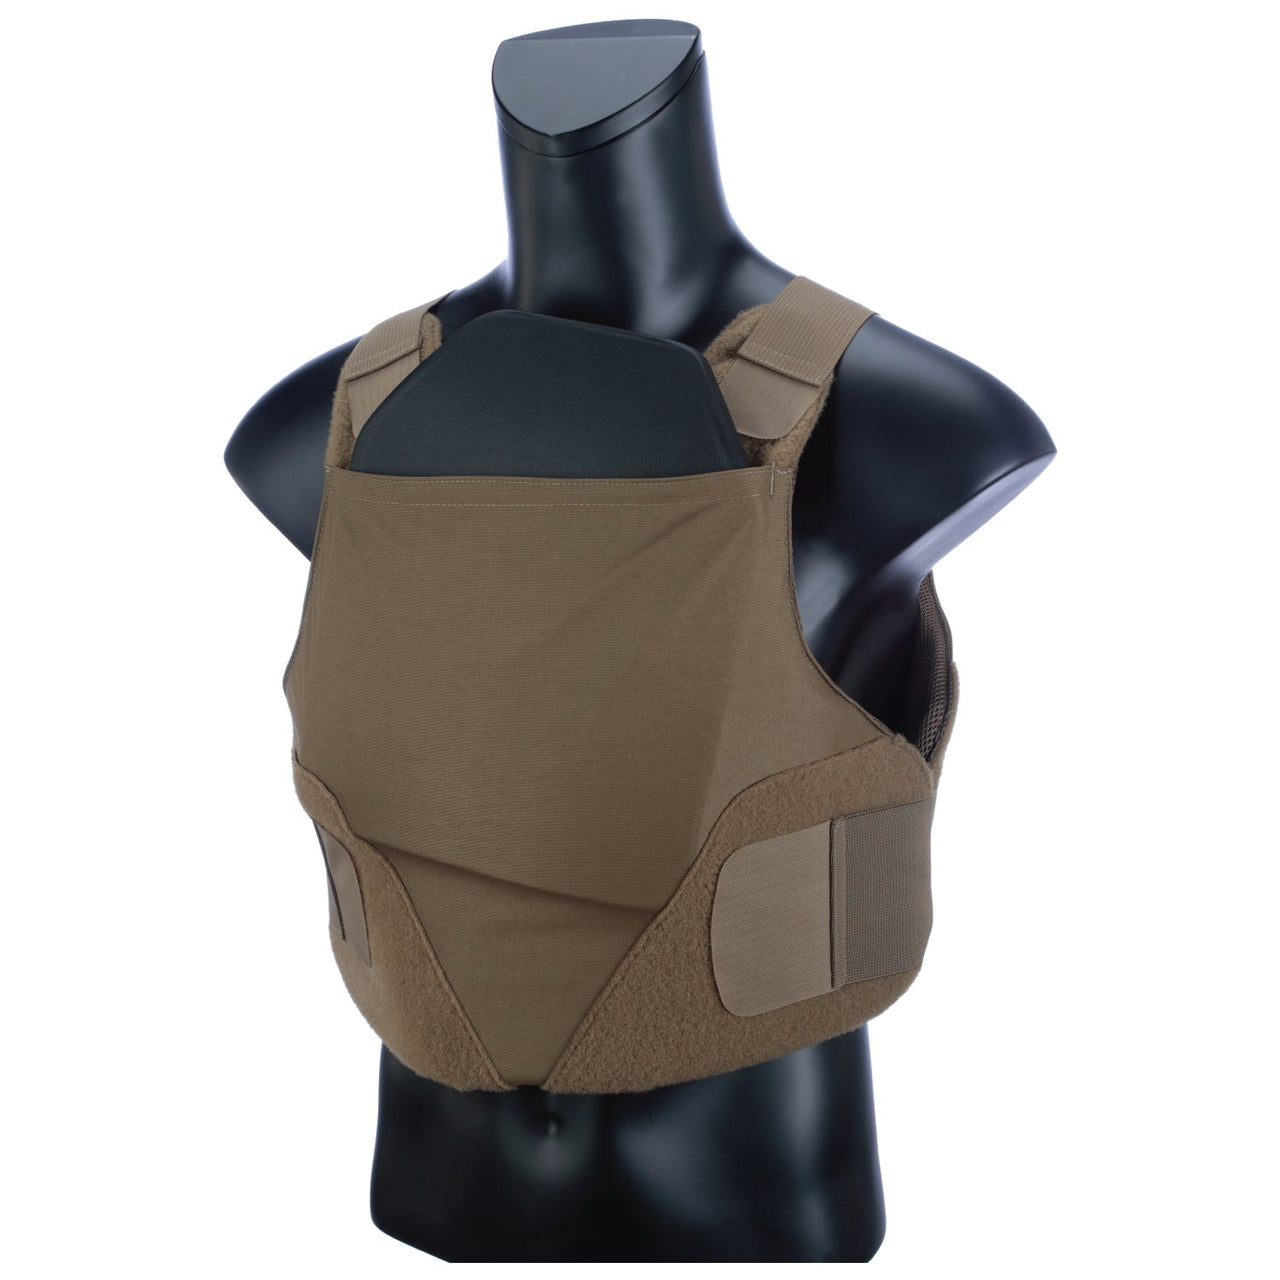 A Body Armor Direct All American Concealable Enhanced Multi-Threat Vest with a plate carrier.